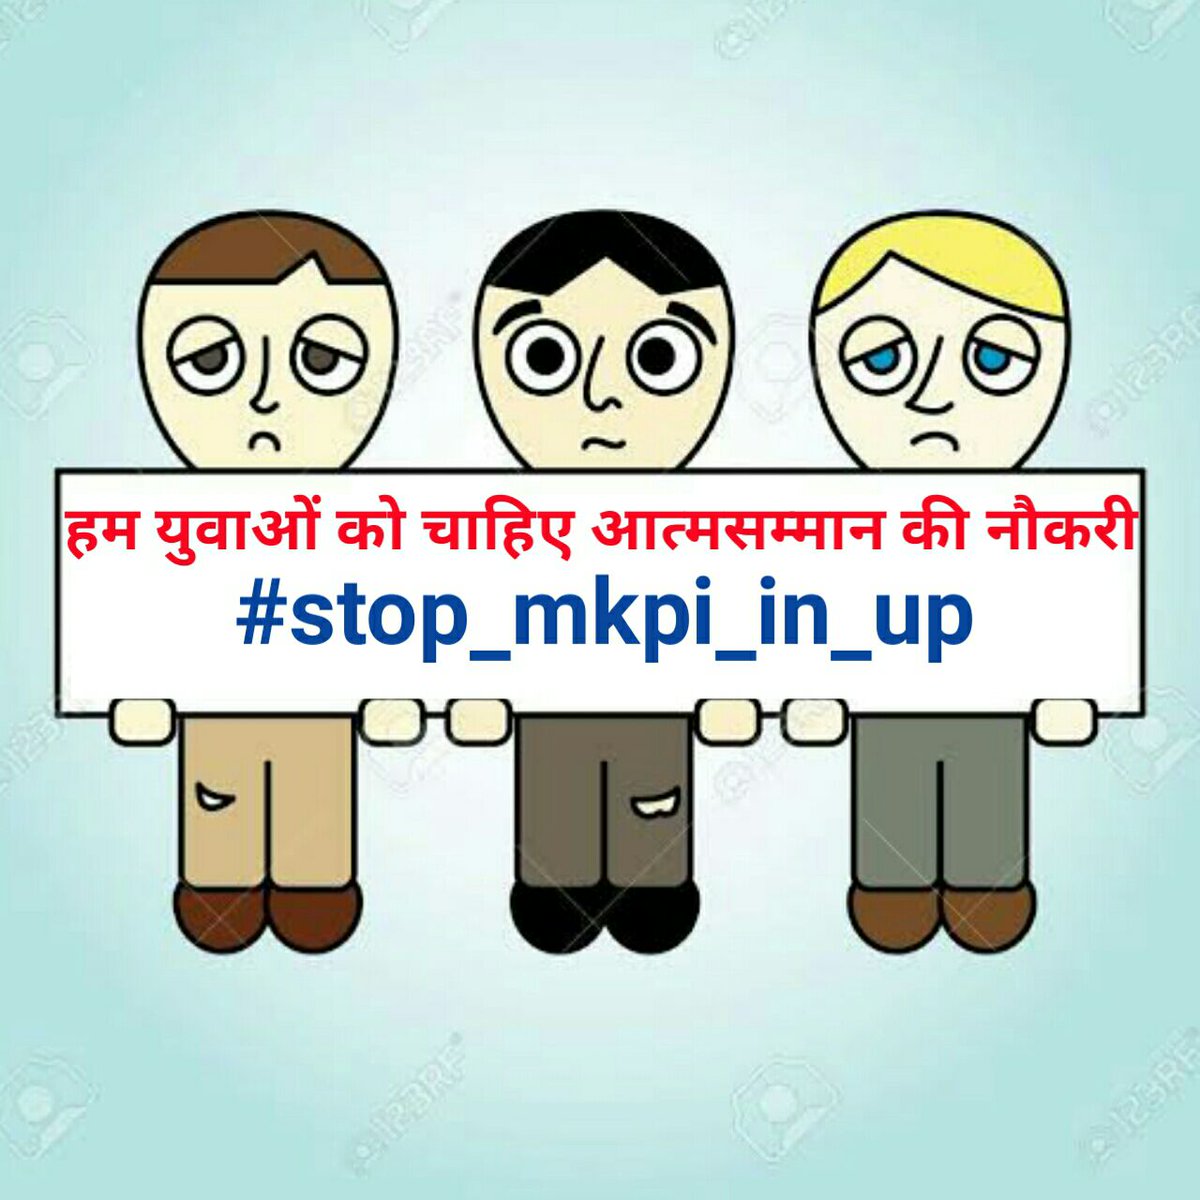 This proposal will lead to increase in harassment of female colleagues by their seniors, corruption, bribery, depressions level of government job anspirants . Such a waste move 🙄😏 #योगीजी_नही_चाहिये_संविदा #stop_mkpi_in_upShameful #stop_mpki_in_up #TAKE_BACK_UP_MKPI_YOGIJI